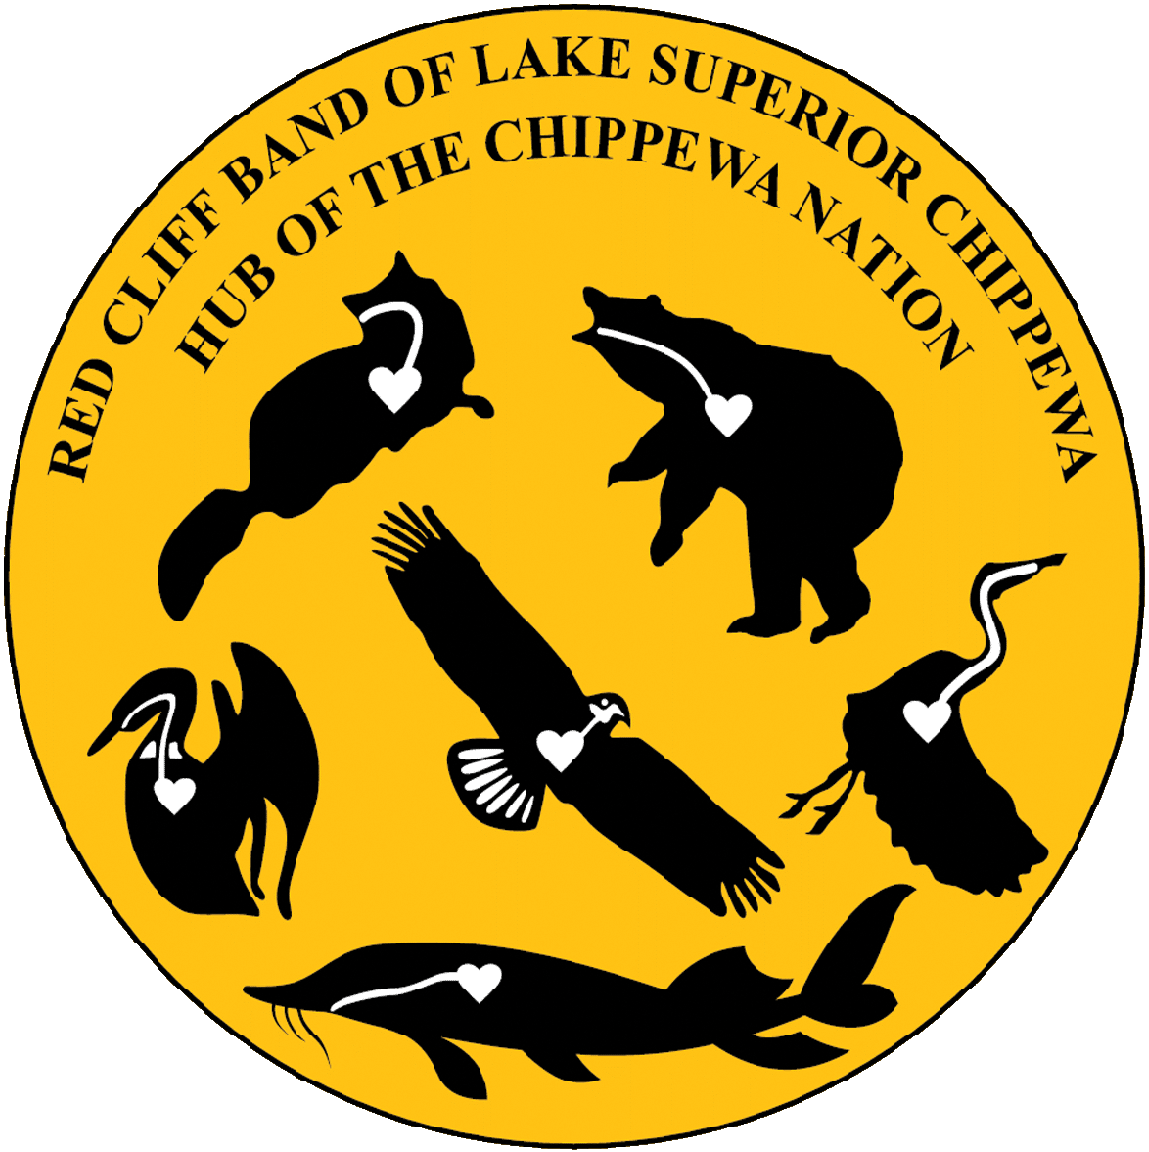 Red Cliff Logo - Red Cliff Band of Lake Superior Chippewa